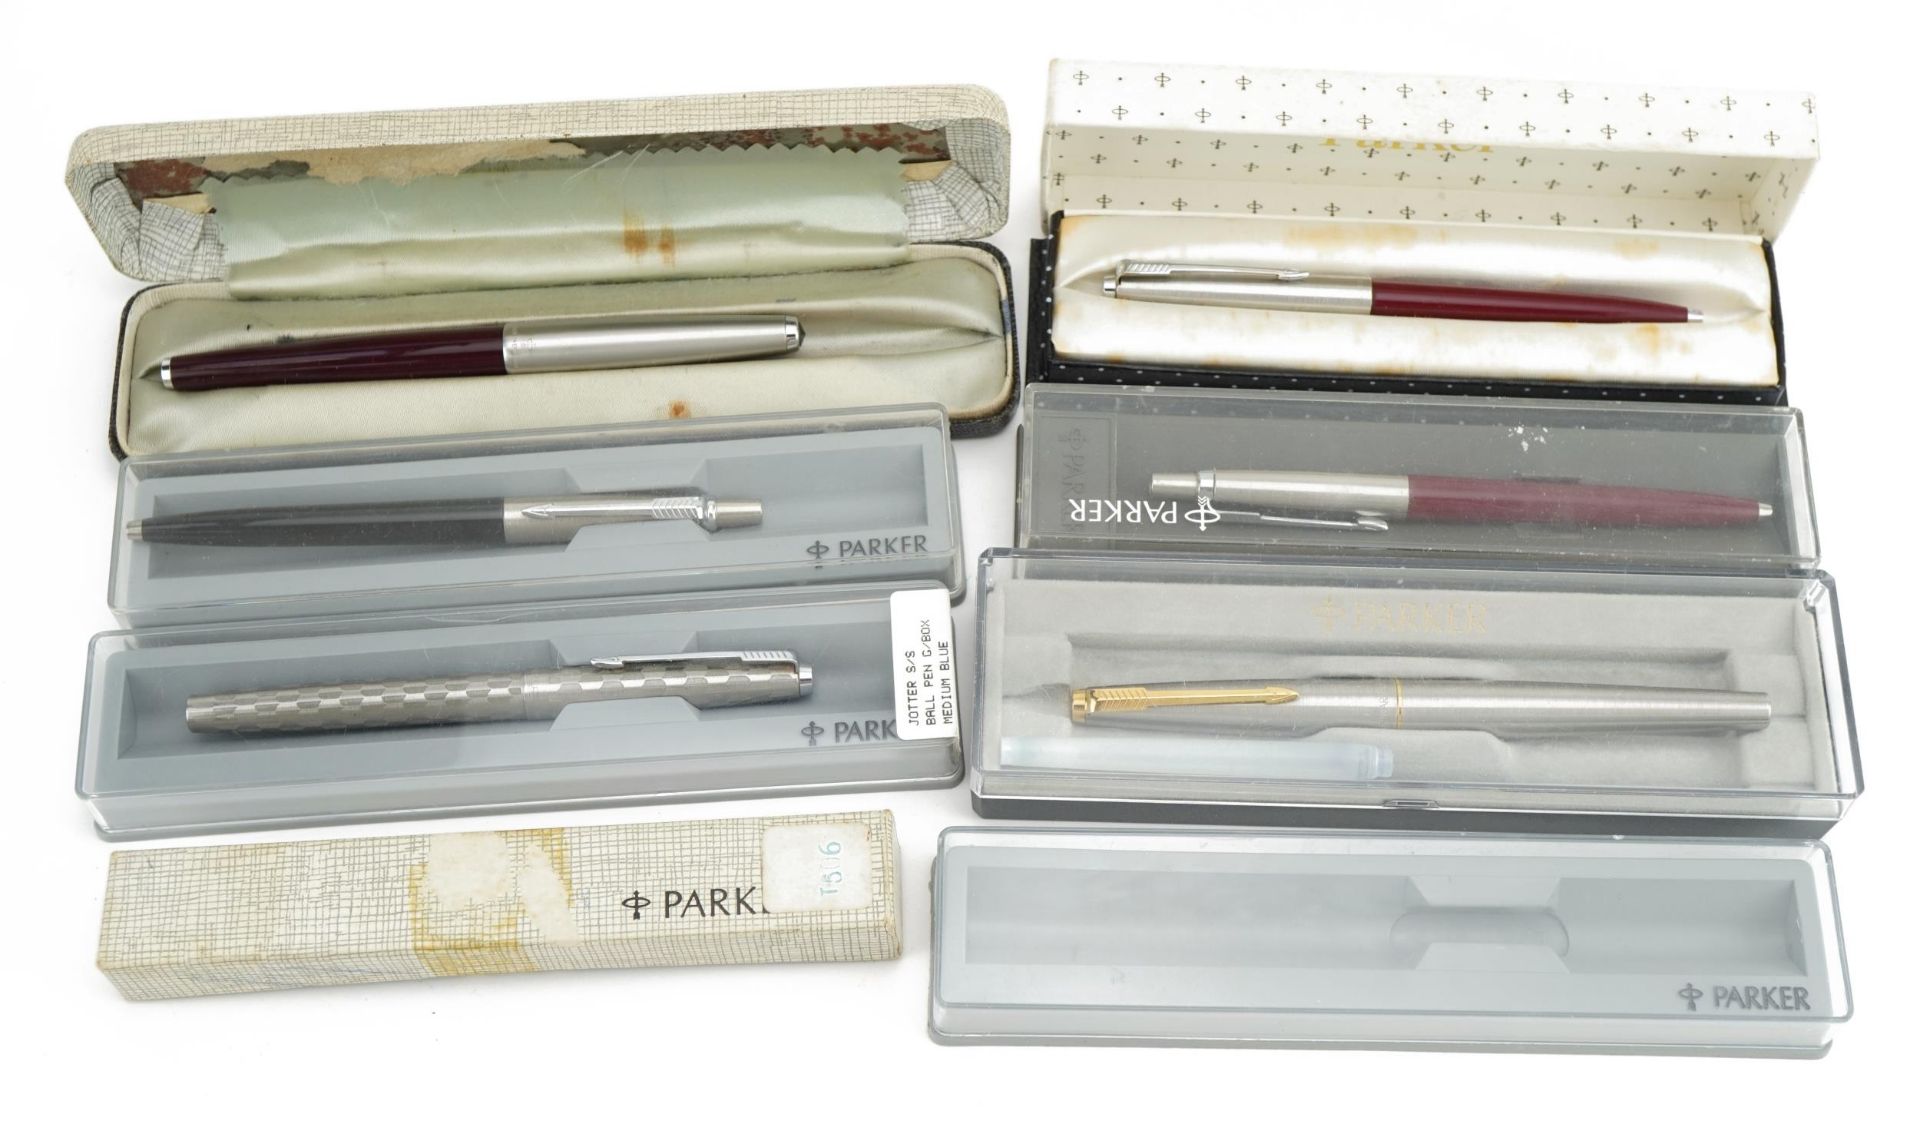 Six boxed Vintage Parker pens and two empty boxes : For further information on this lot please